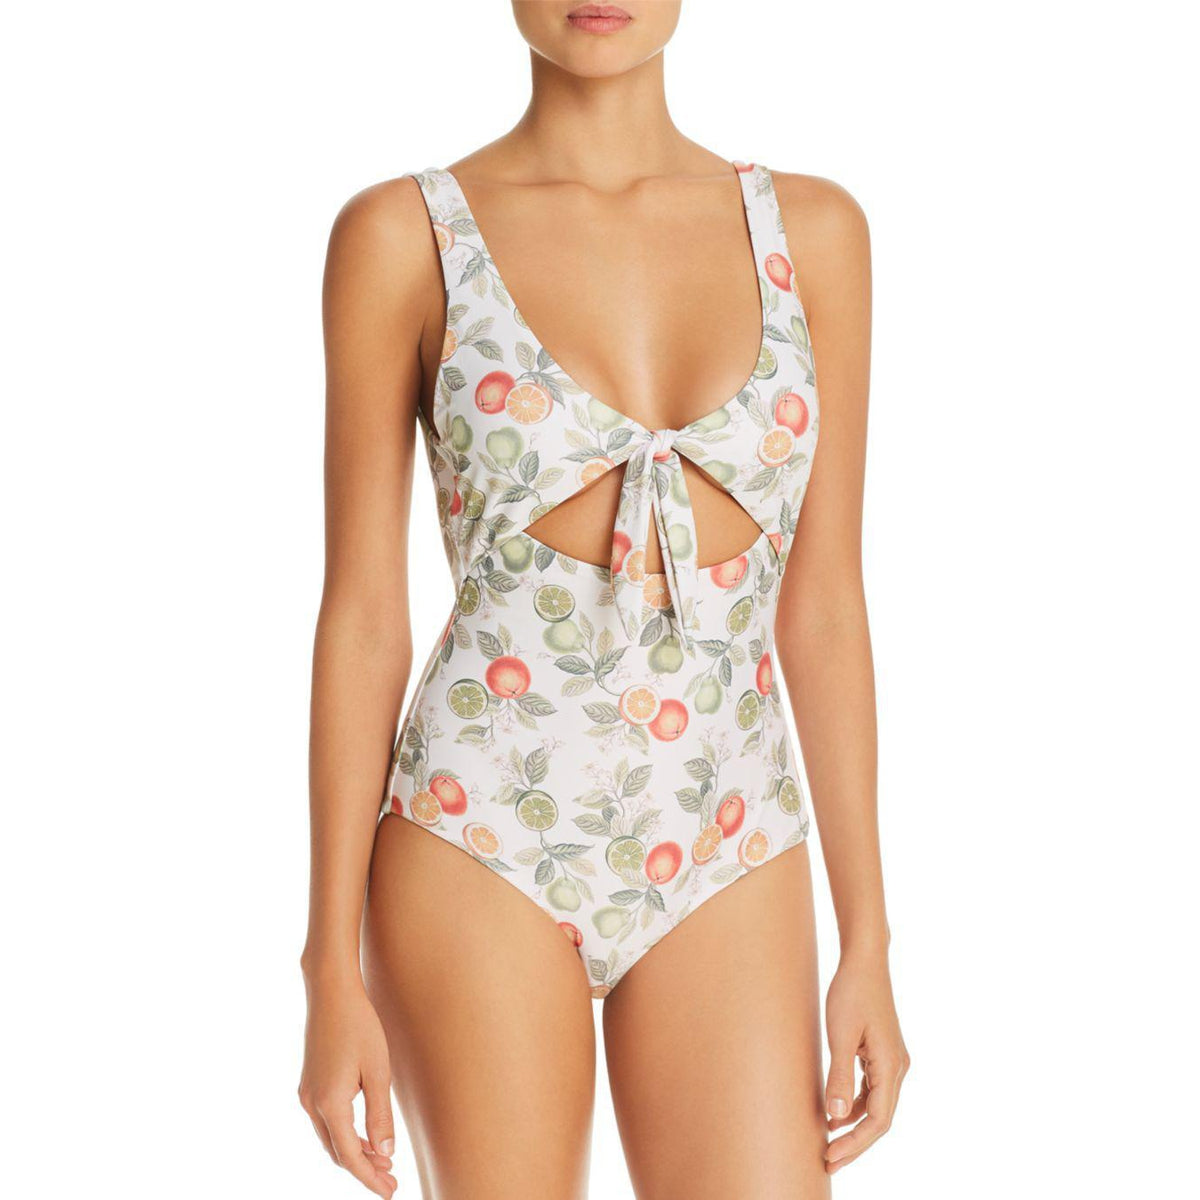 Valencia Frill Tie Front One Piece